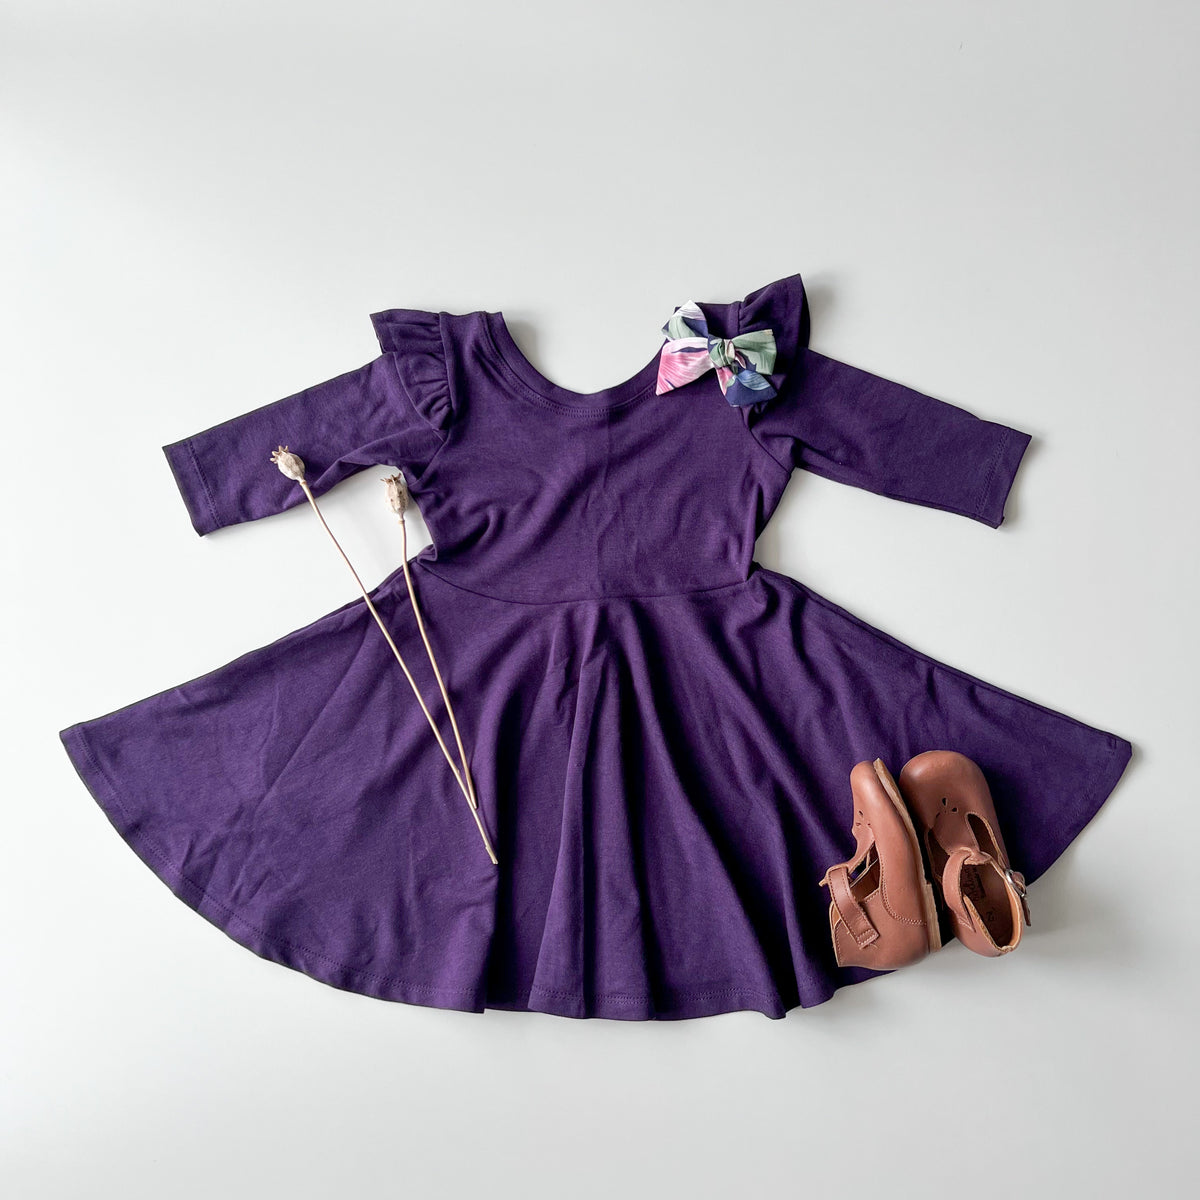 Elle Twirl Dress [3/4 Sleeve With Flutter] in 'Ultraviolet' - Ready To Ship